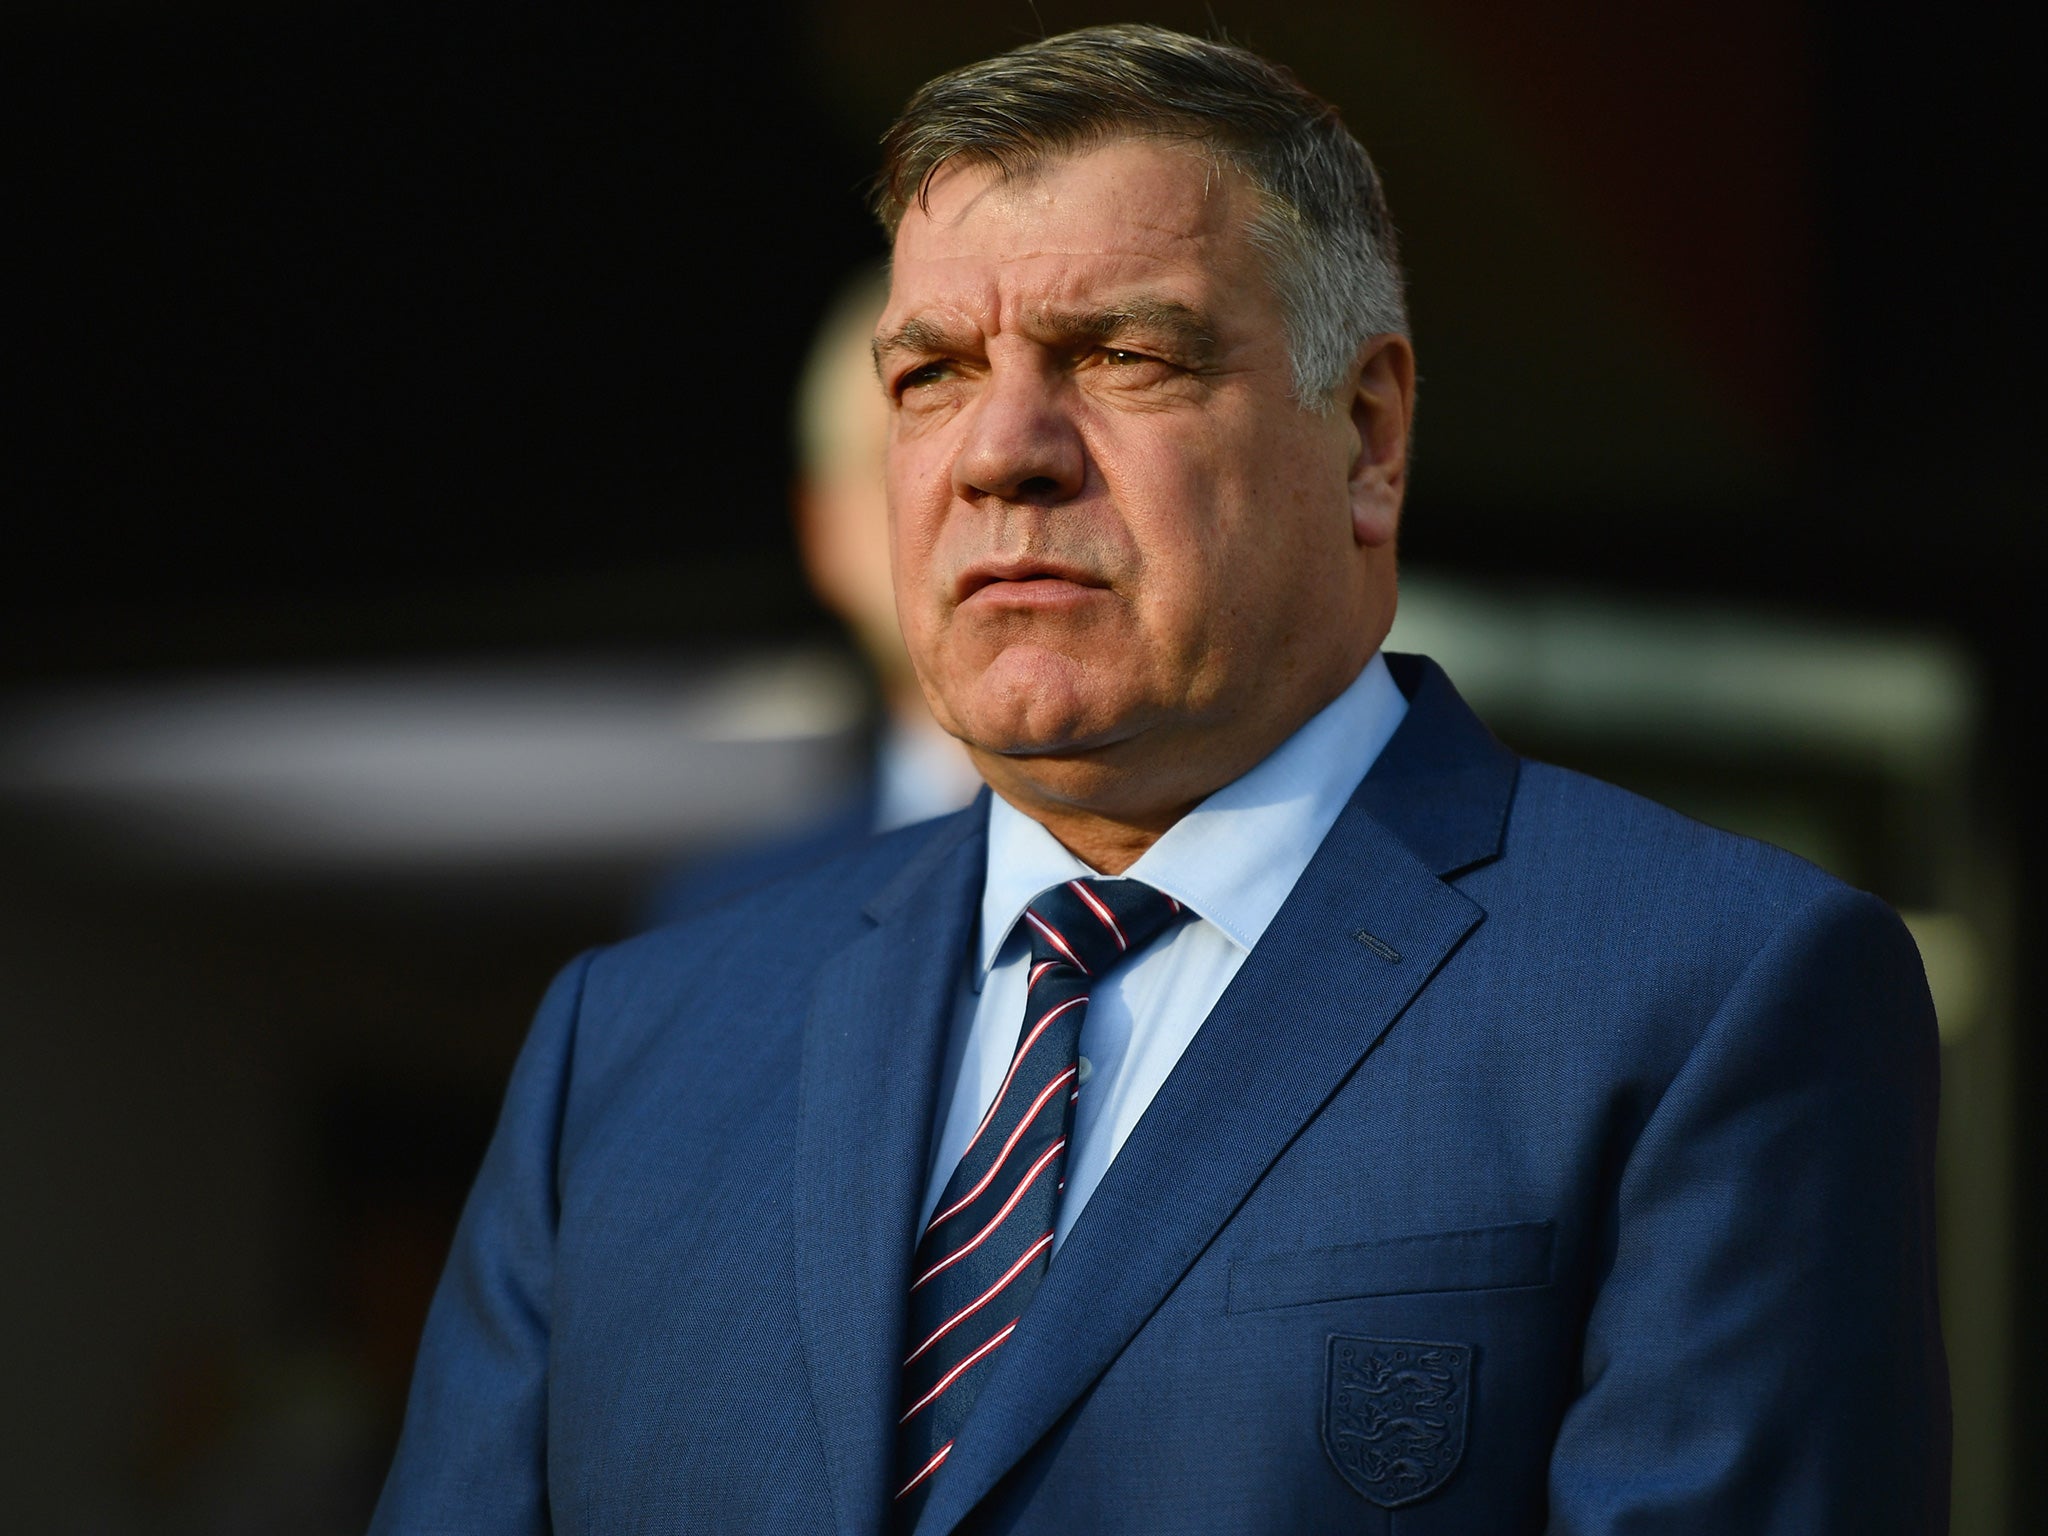 Allardyce was caught out by undercover journalists investigating corruption in football